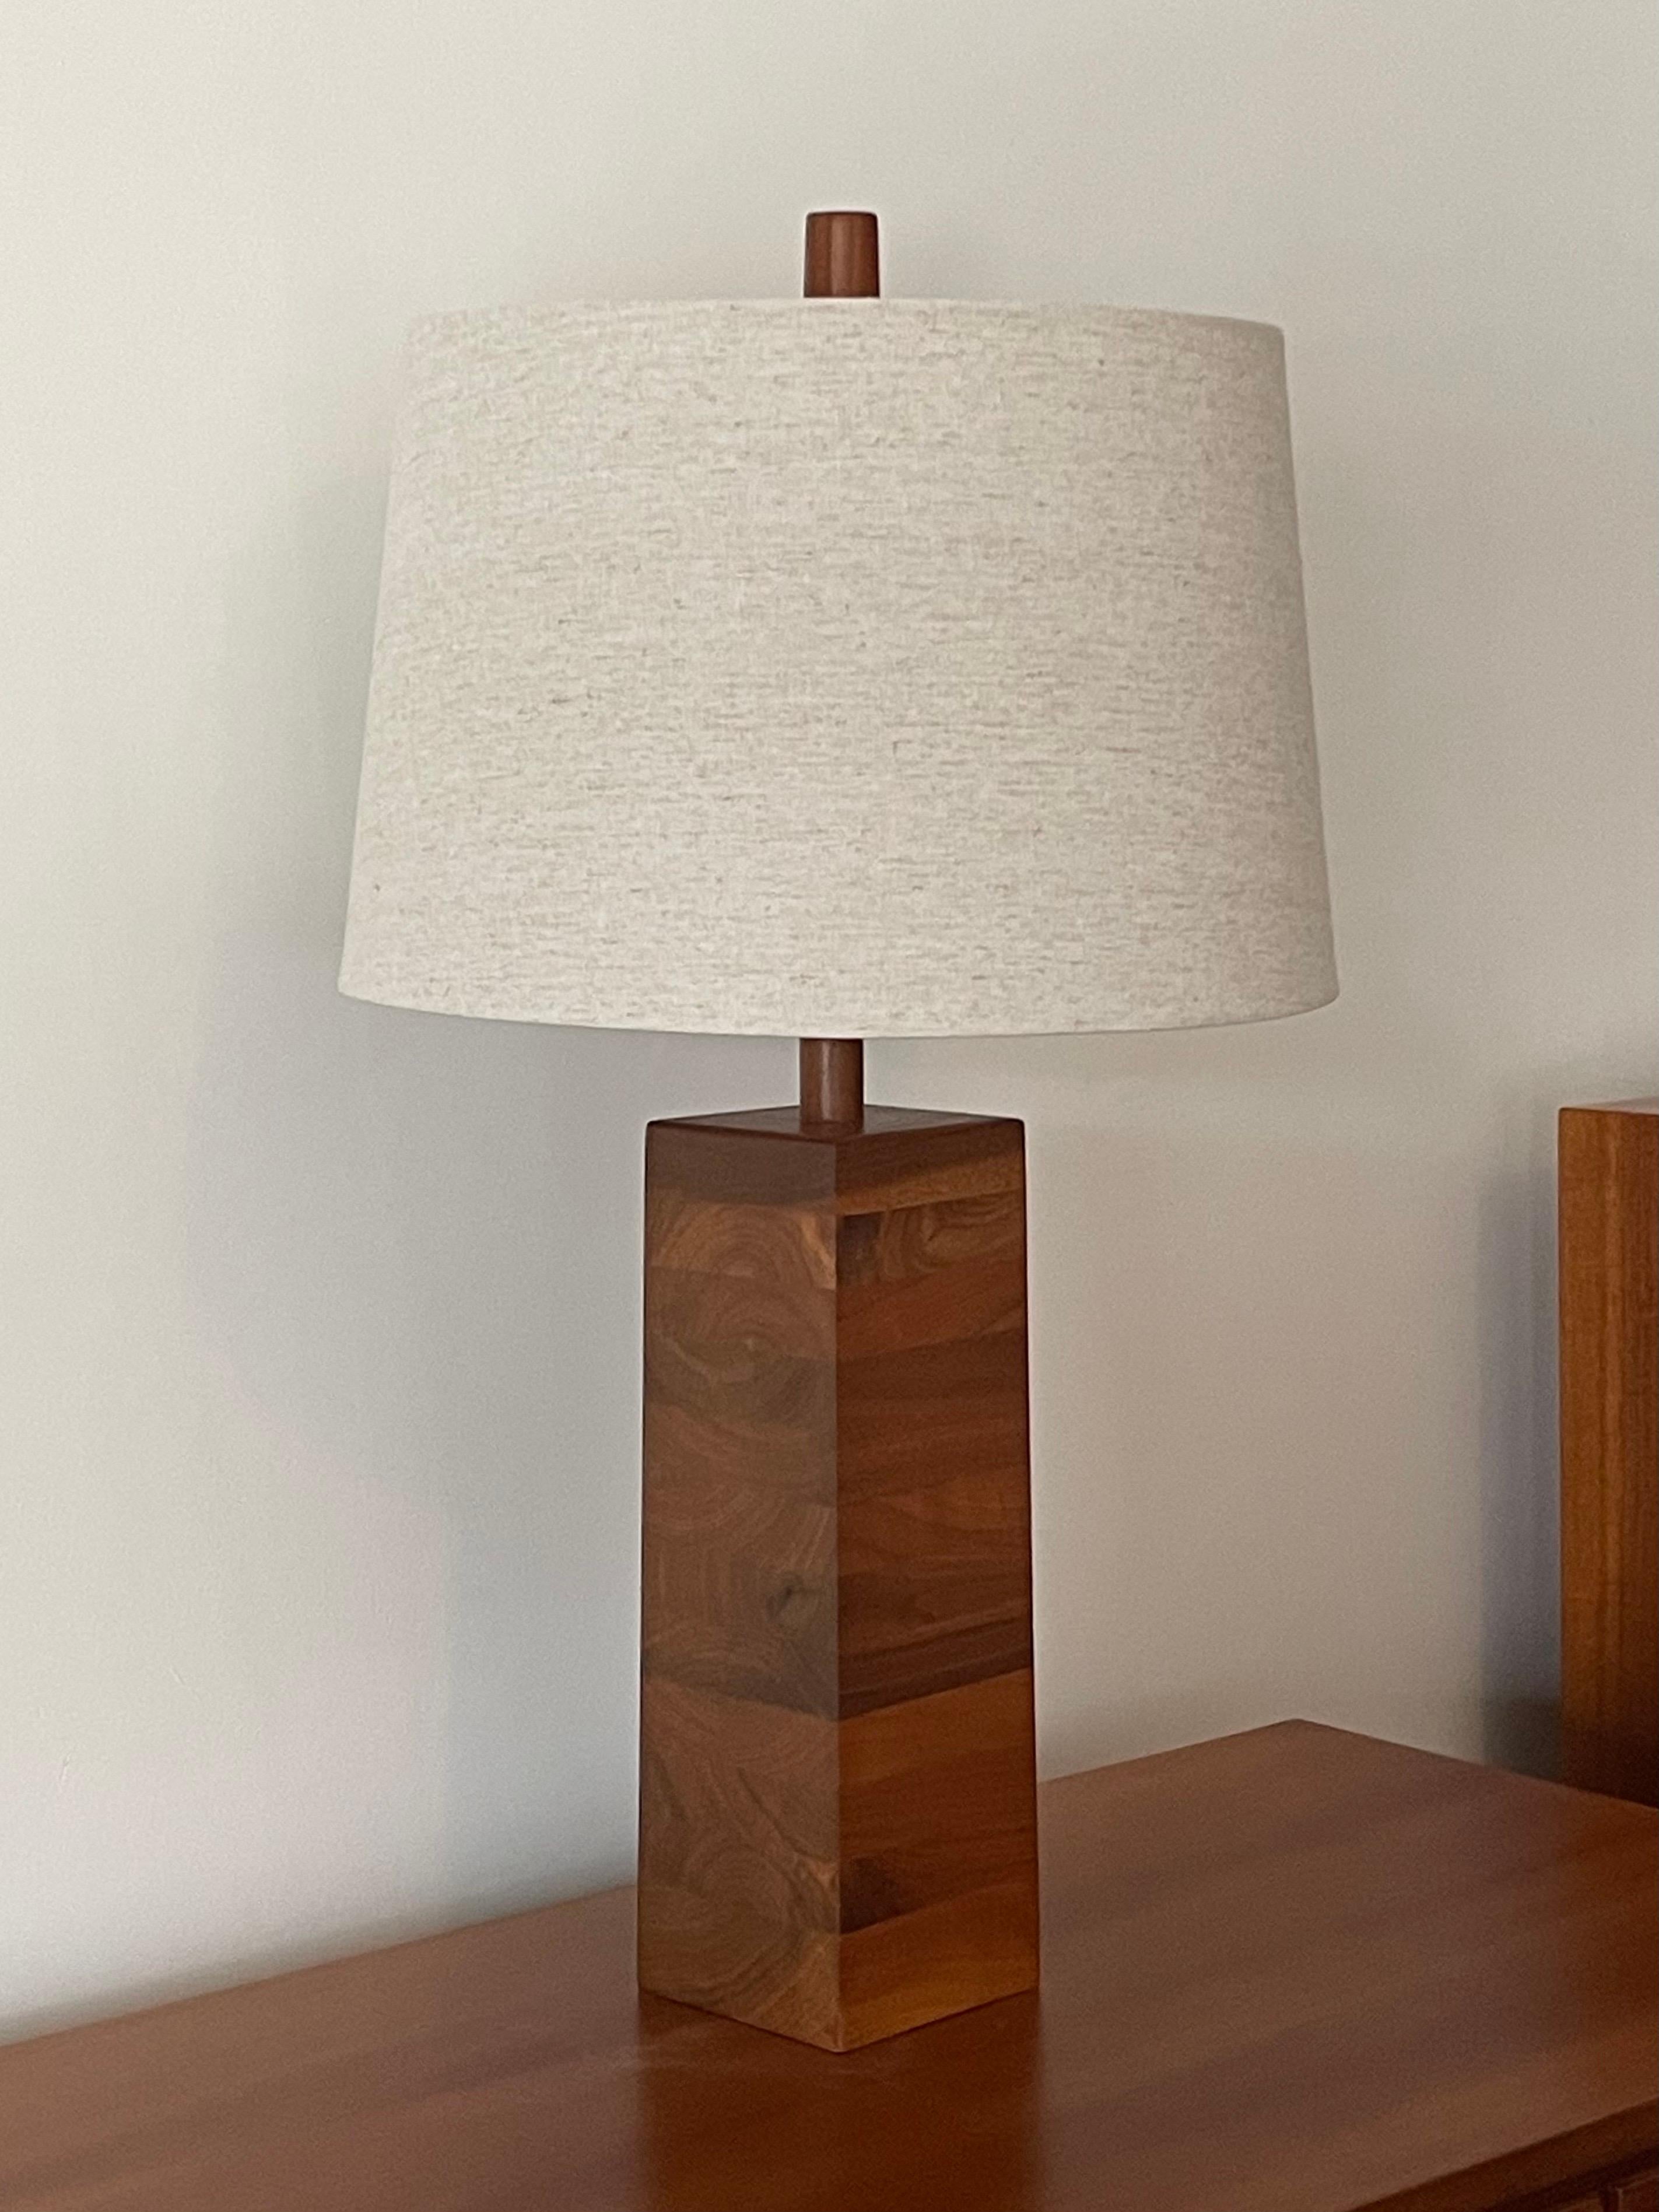 Stacked walnut table lamp designed by famed lamp makers Jane and Gordon Martz. Incredible wood grain creates a flowing form against the stark lines of the lamp. Original finial.

Overall dimensions:
27” tall
15” wide 

Main wood body